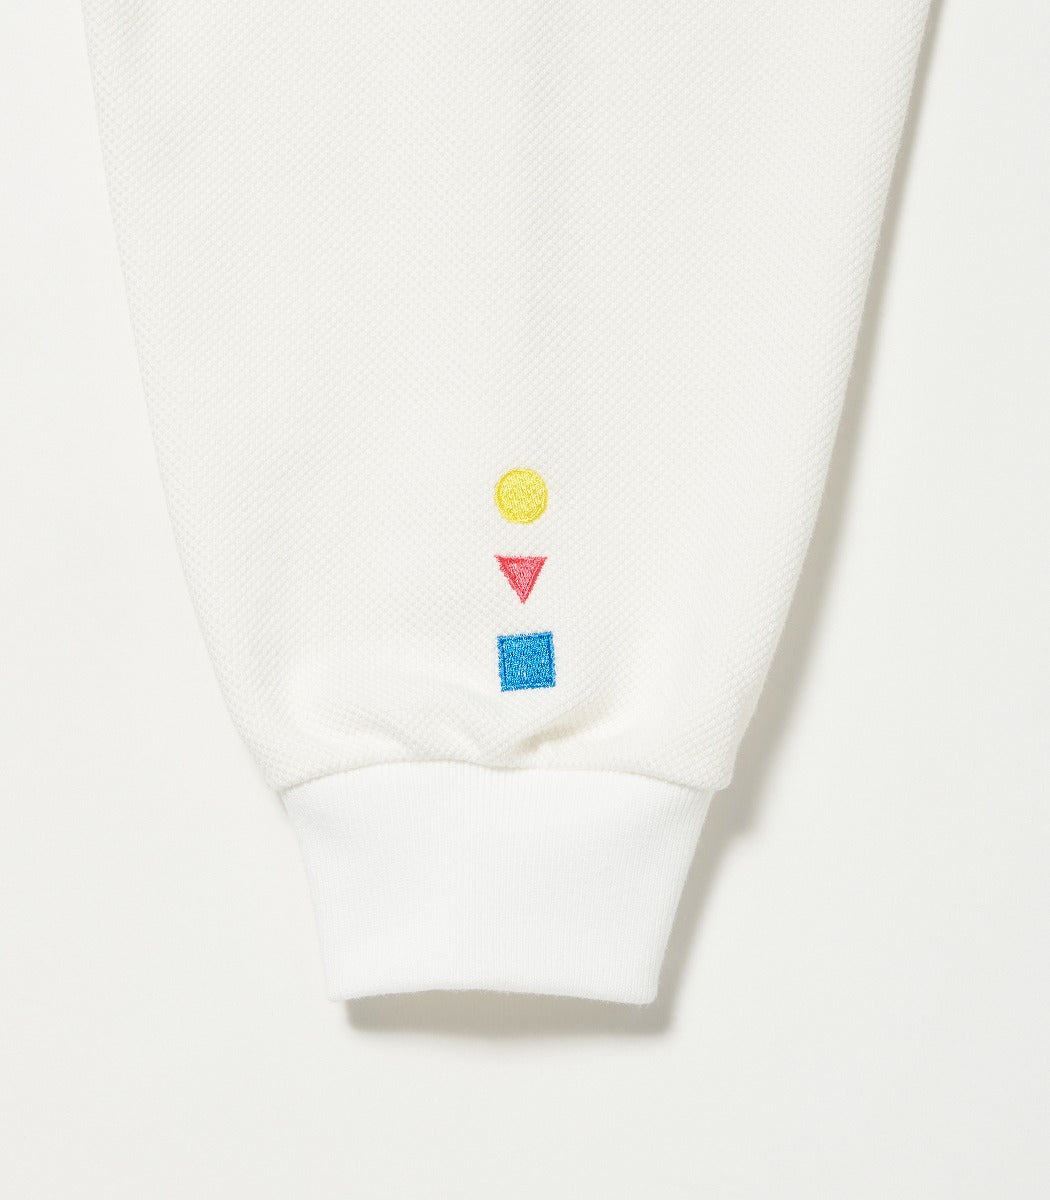 Load image into Gallery viewer, L/S Polo shirt White
